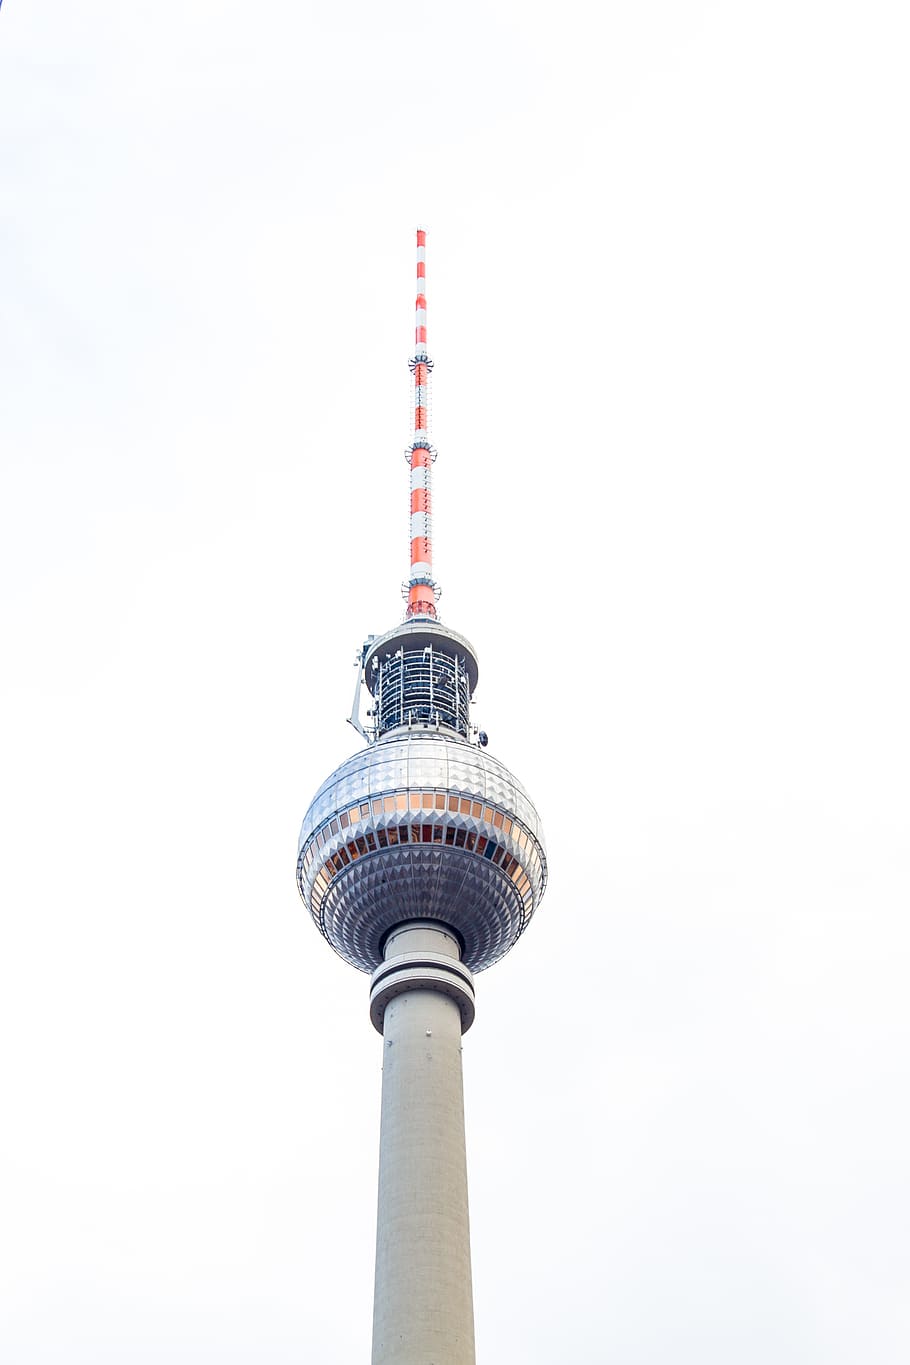 sky, tower, fernsehturm, berlin, germany, sightseeing, architecture